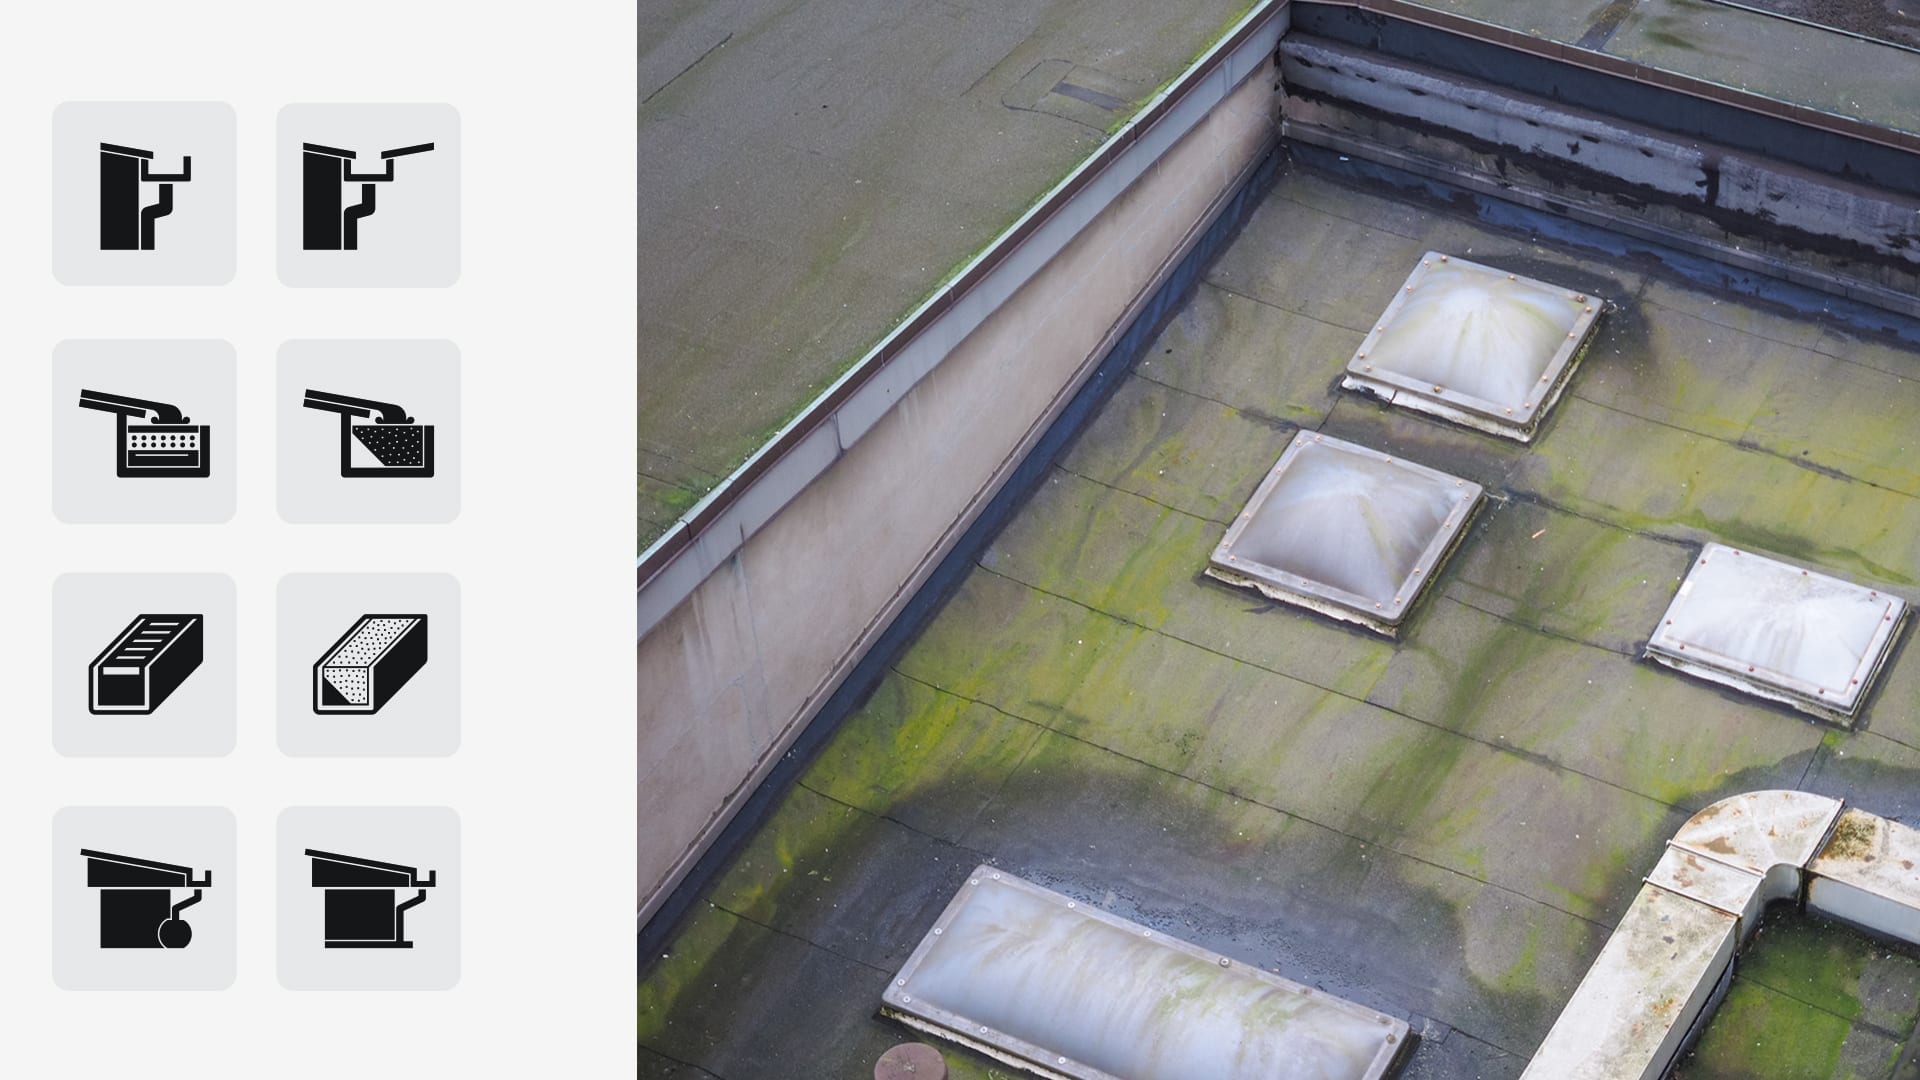 water on flat roof with skylights - aerial view